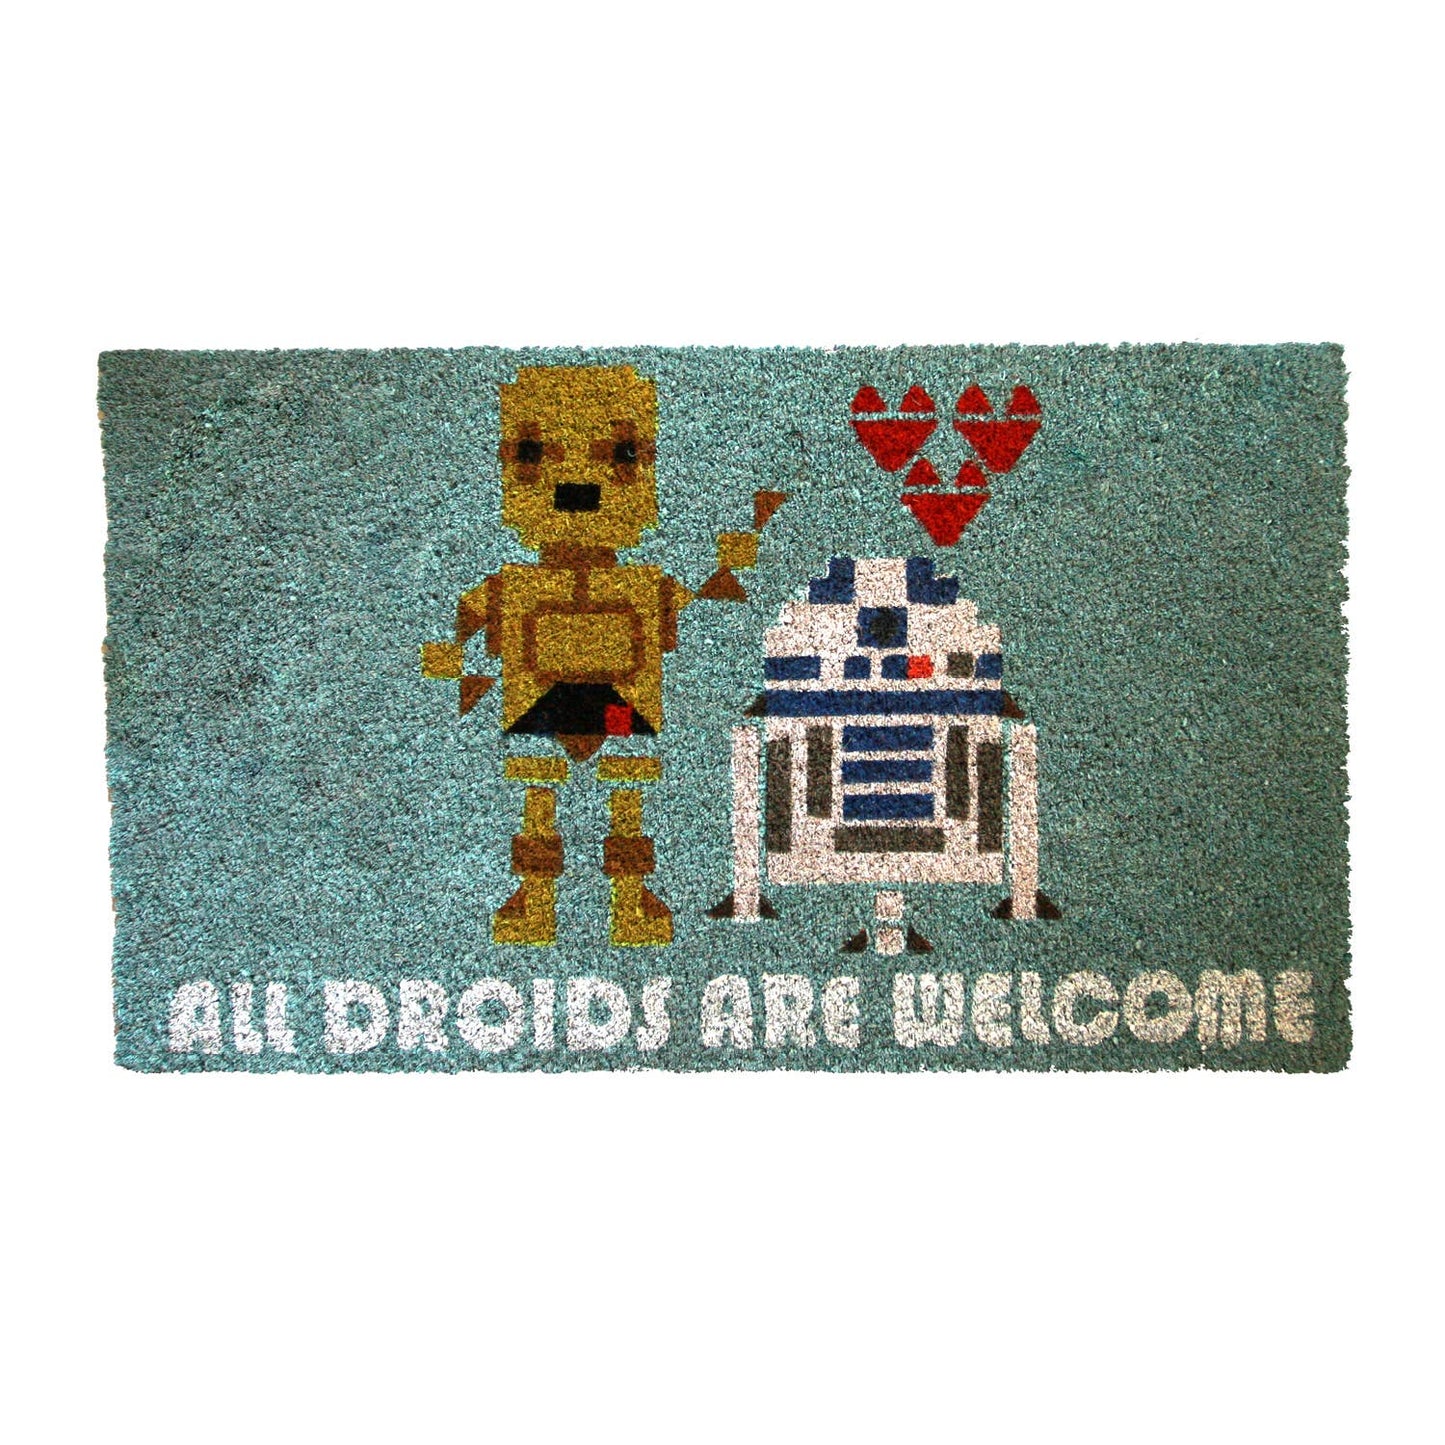 Star Wars - All Droids Are Welcome Doormat